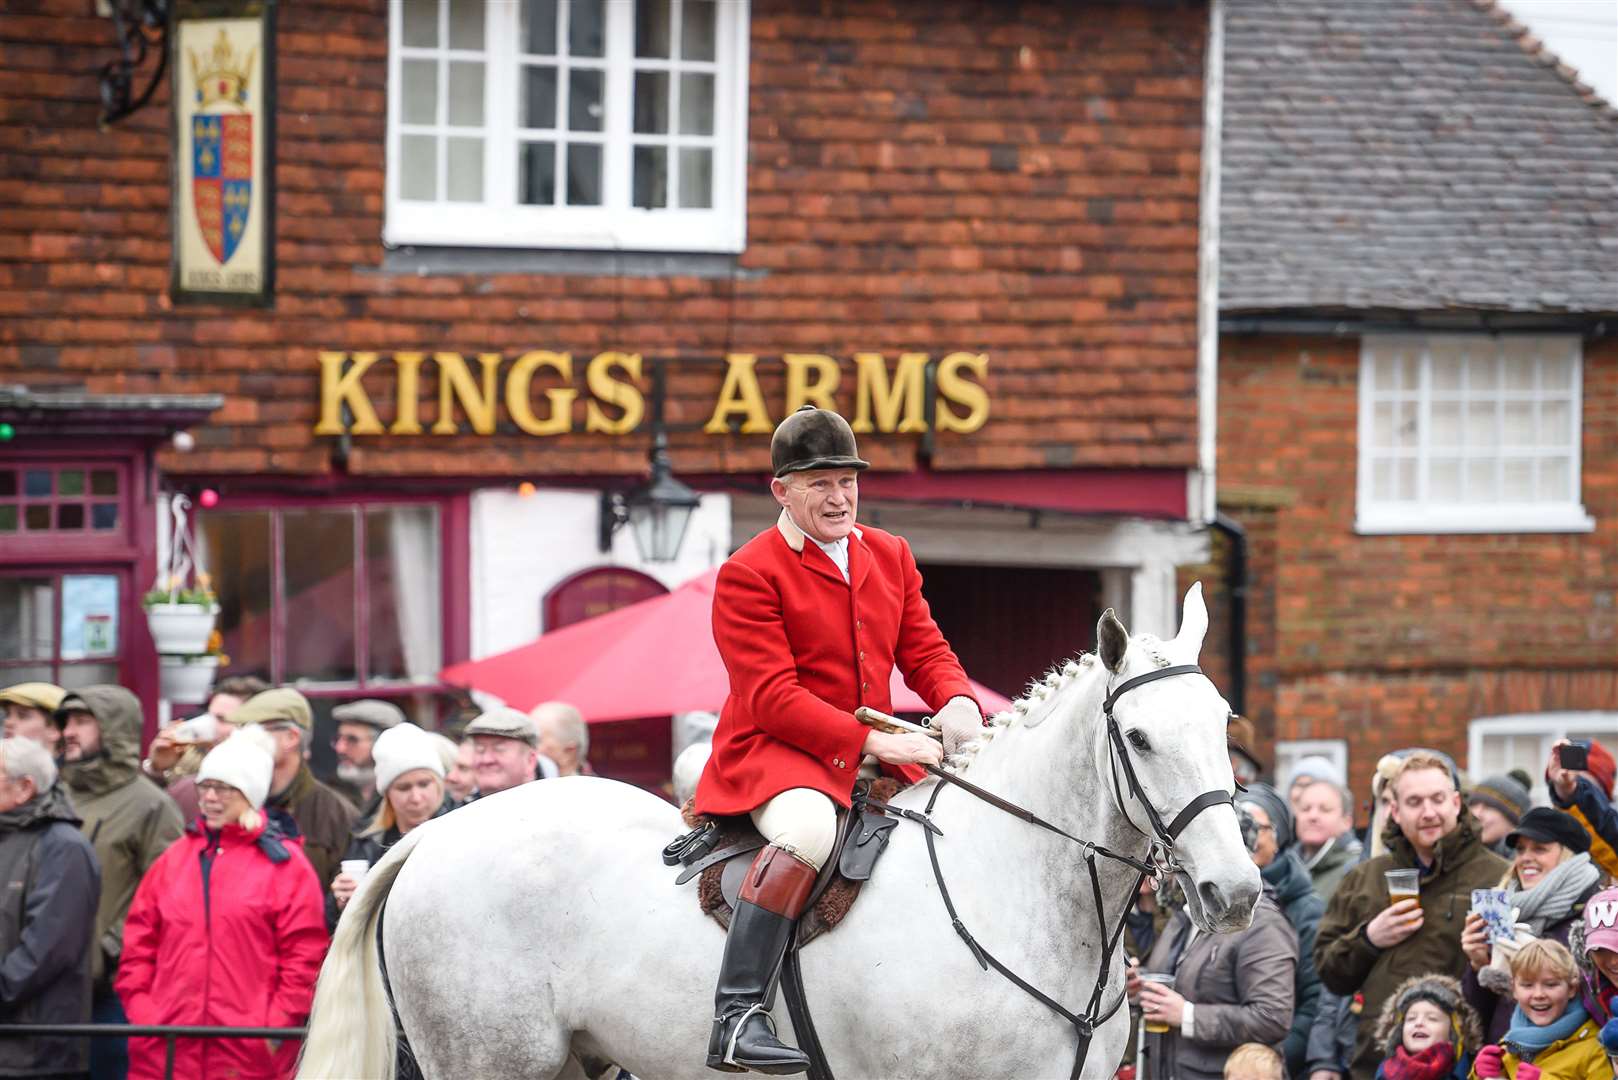 The hunt arriving in the square